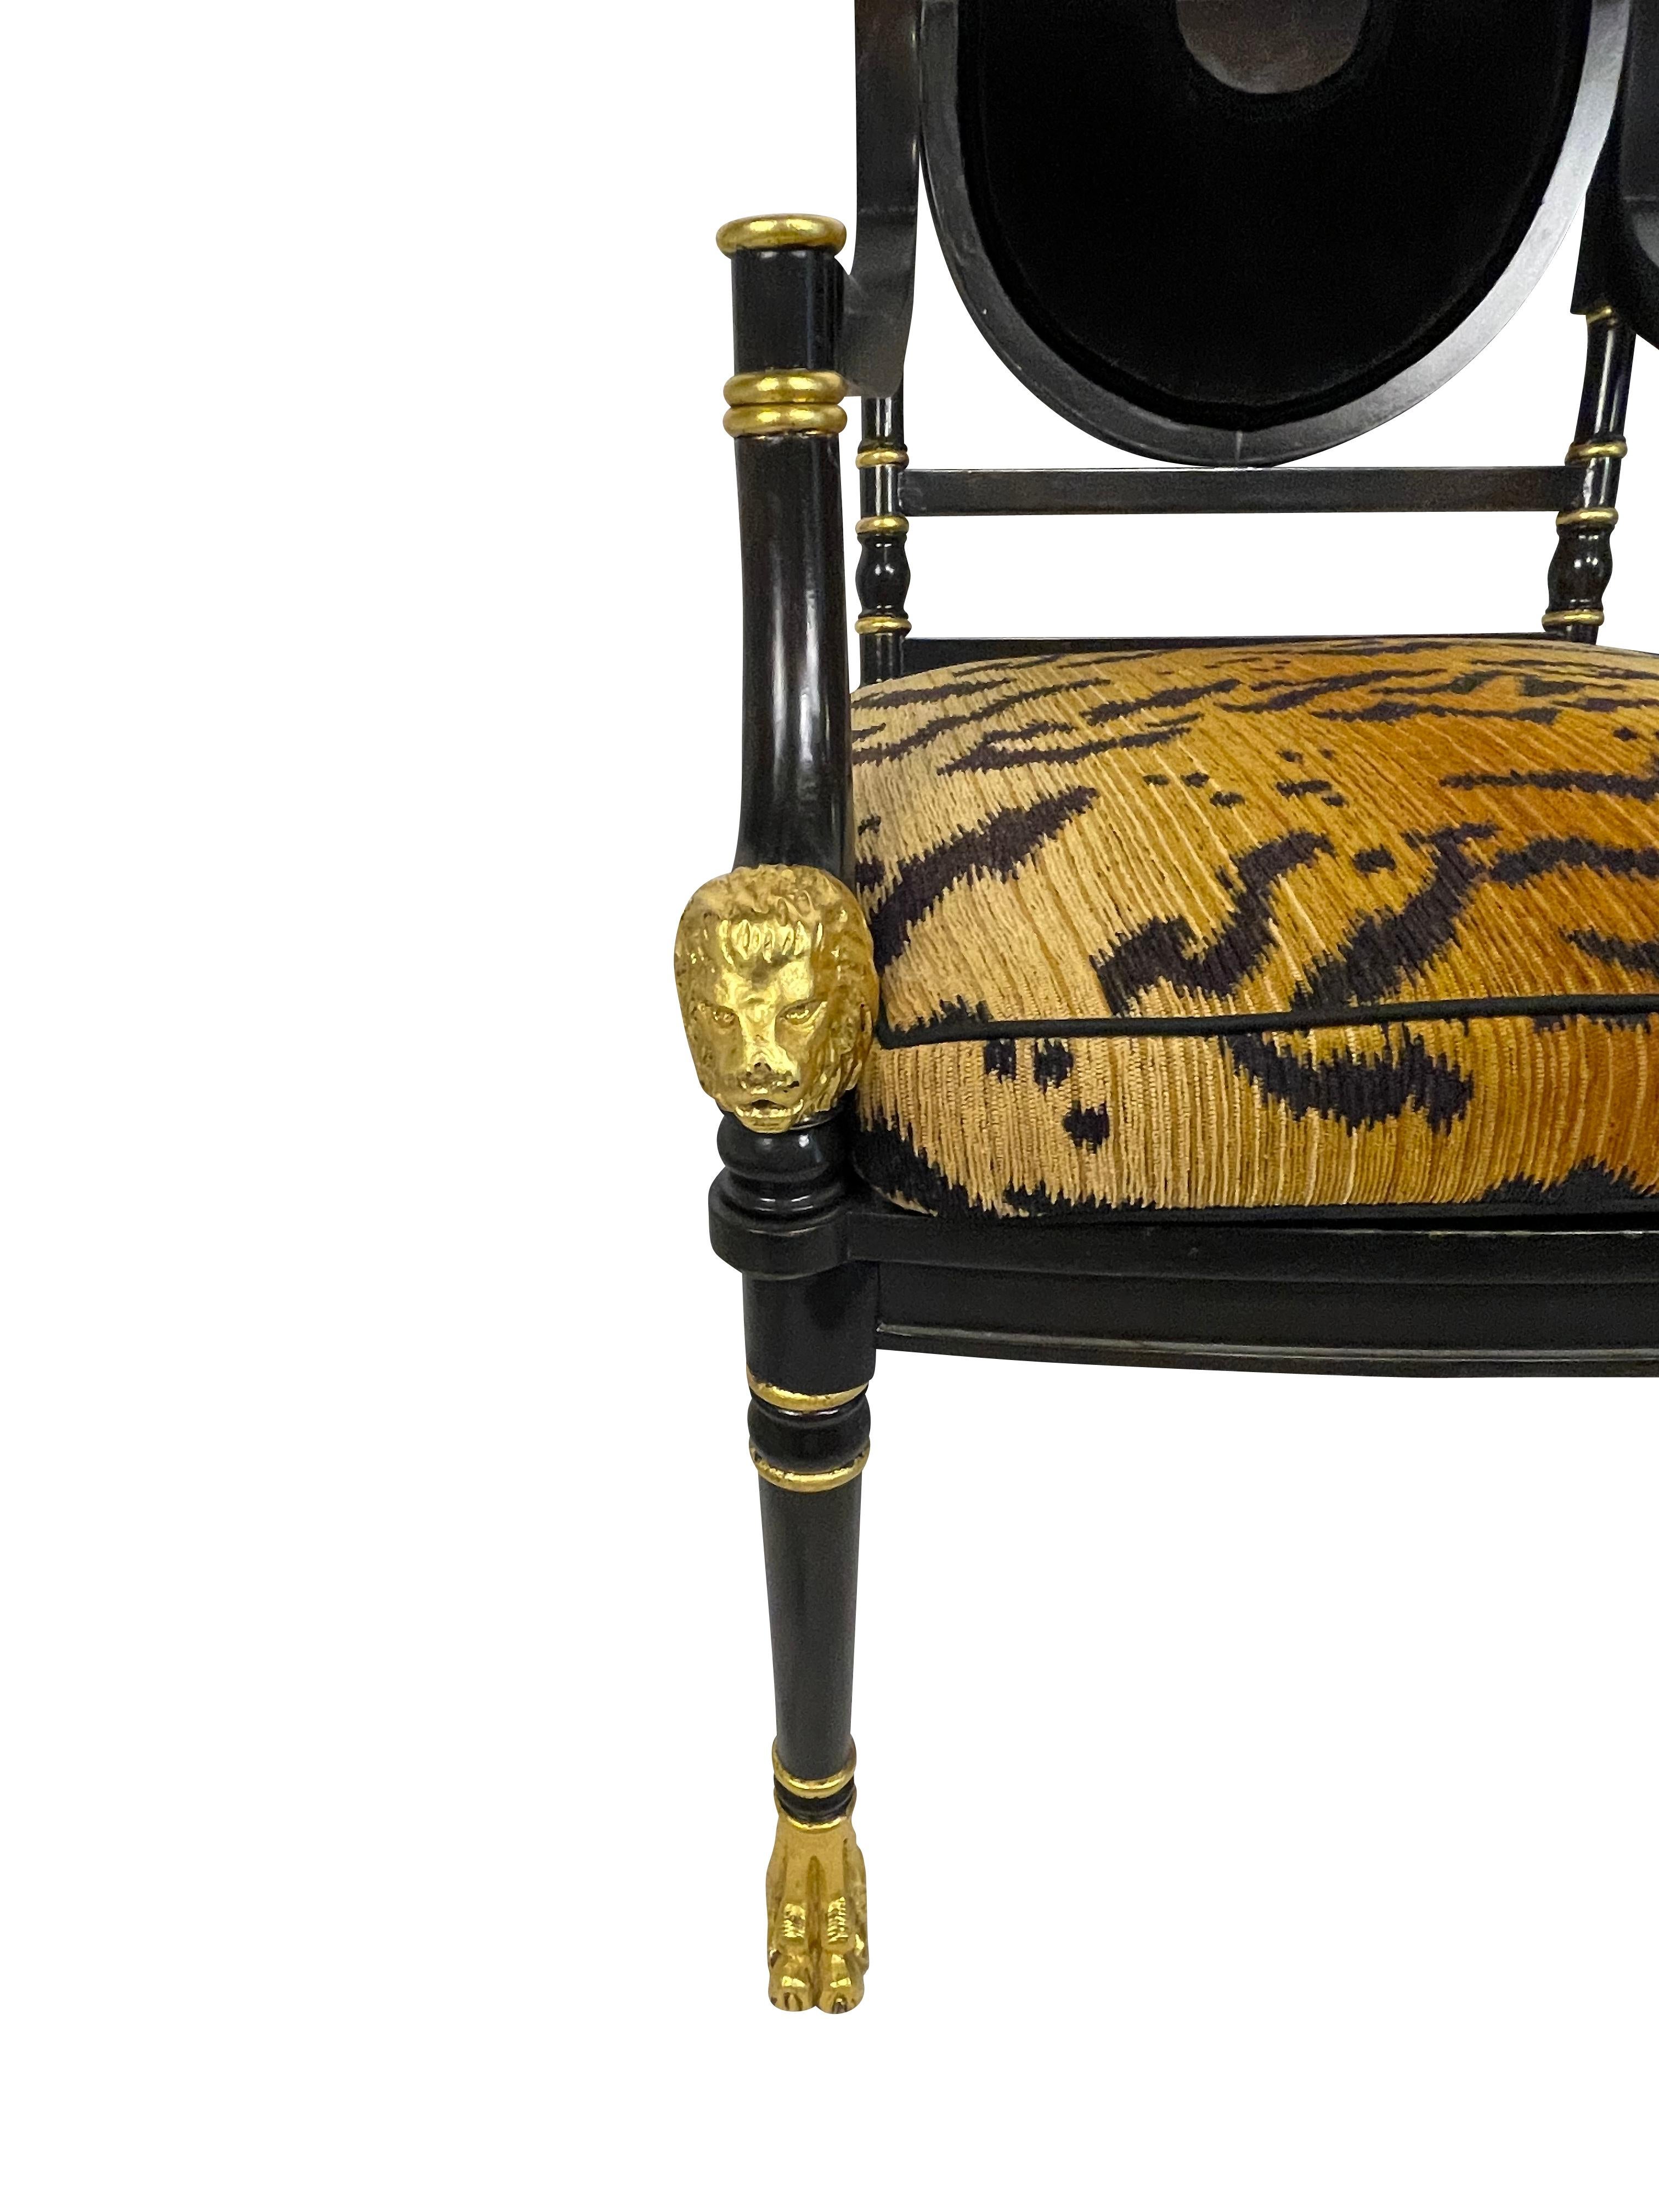 American Regency Style Black Ebonized and Gilt Decorated Chairs with Animal Print Cushion